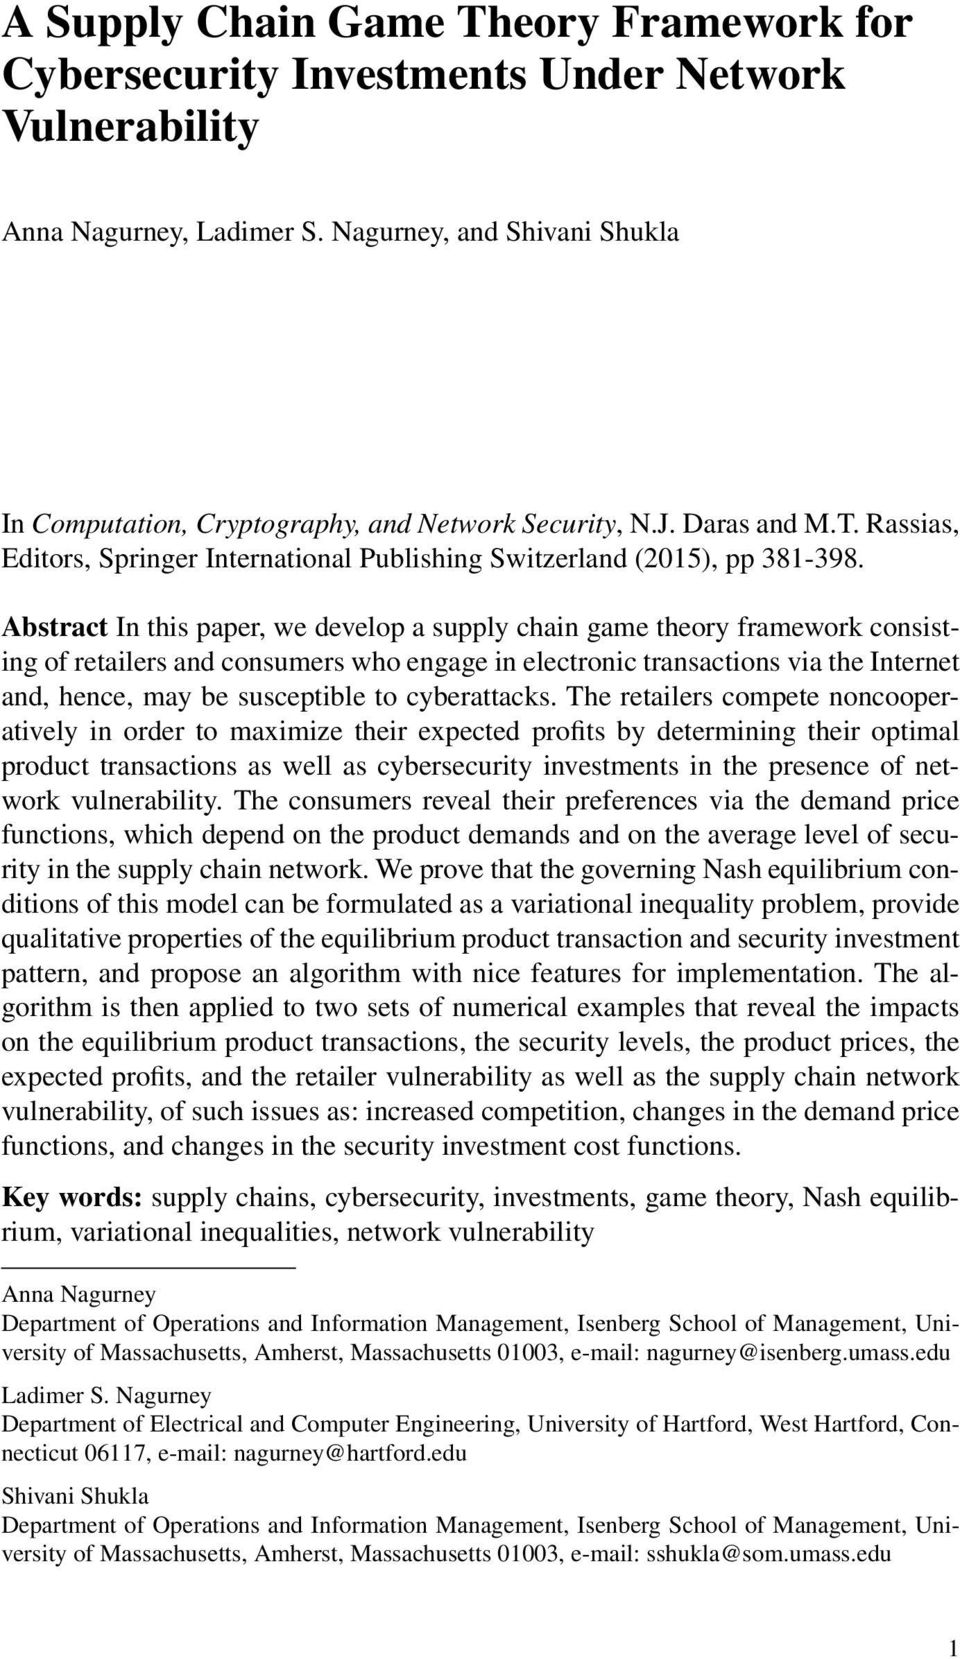 Abstract I this paper, we develop a supply chai gae theory fraework cosistig of retailers ad cosuers who egage i electroic trasactios via the Iteret ad, hece, ay be susceptible to cyberattacks.